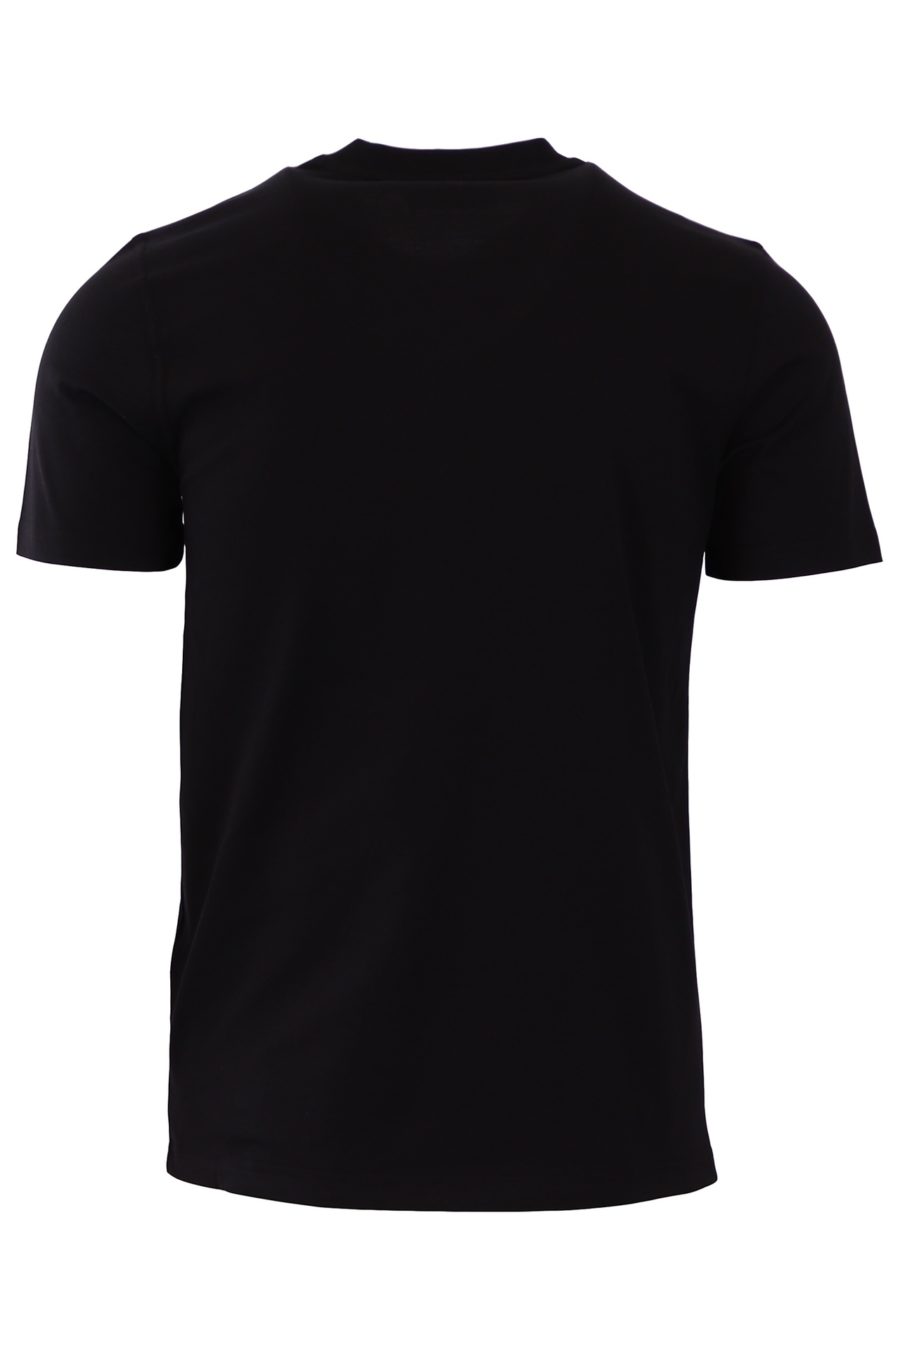 Givenchy T-shirt black slim fit embroidered logo - 226615662ae4afde66042db4cc7ae3e6c5a0d9d7